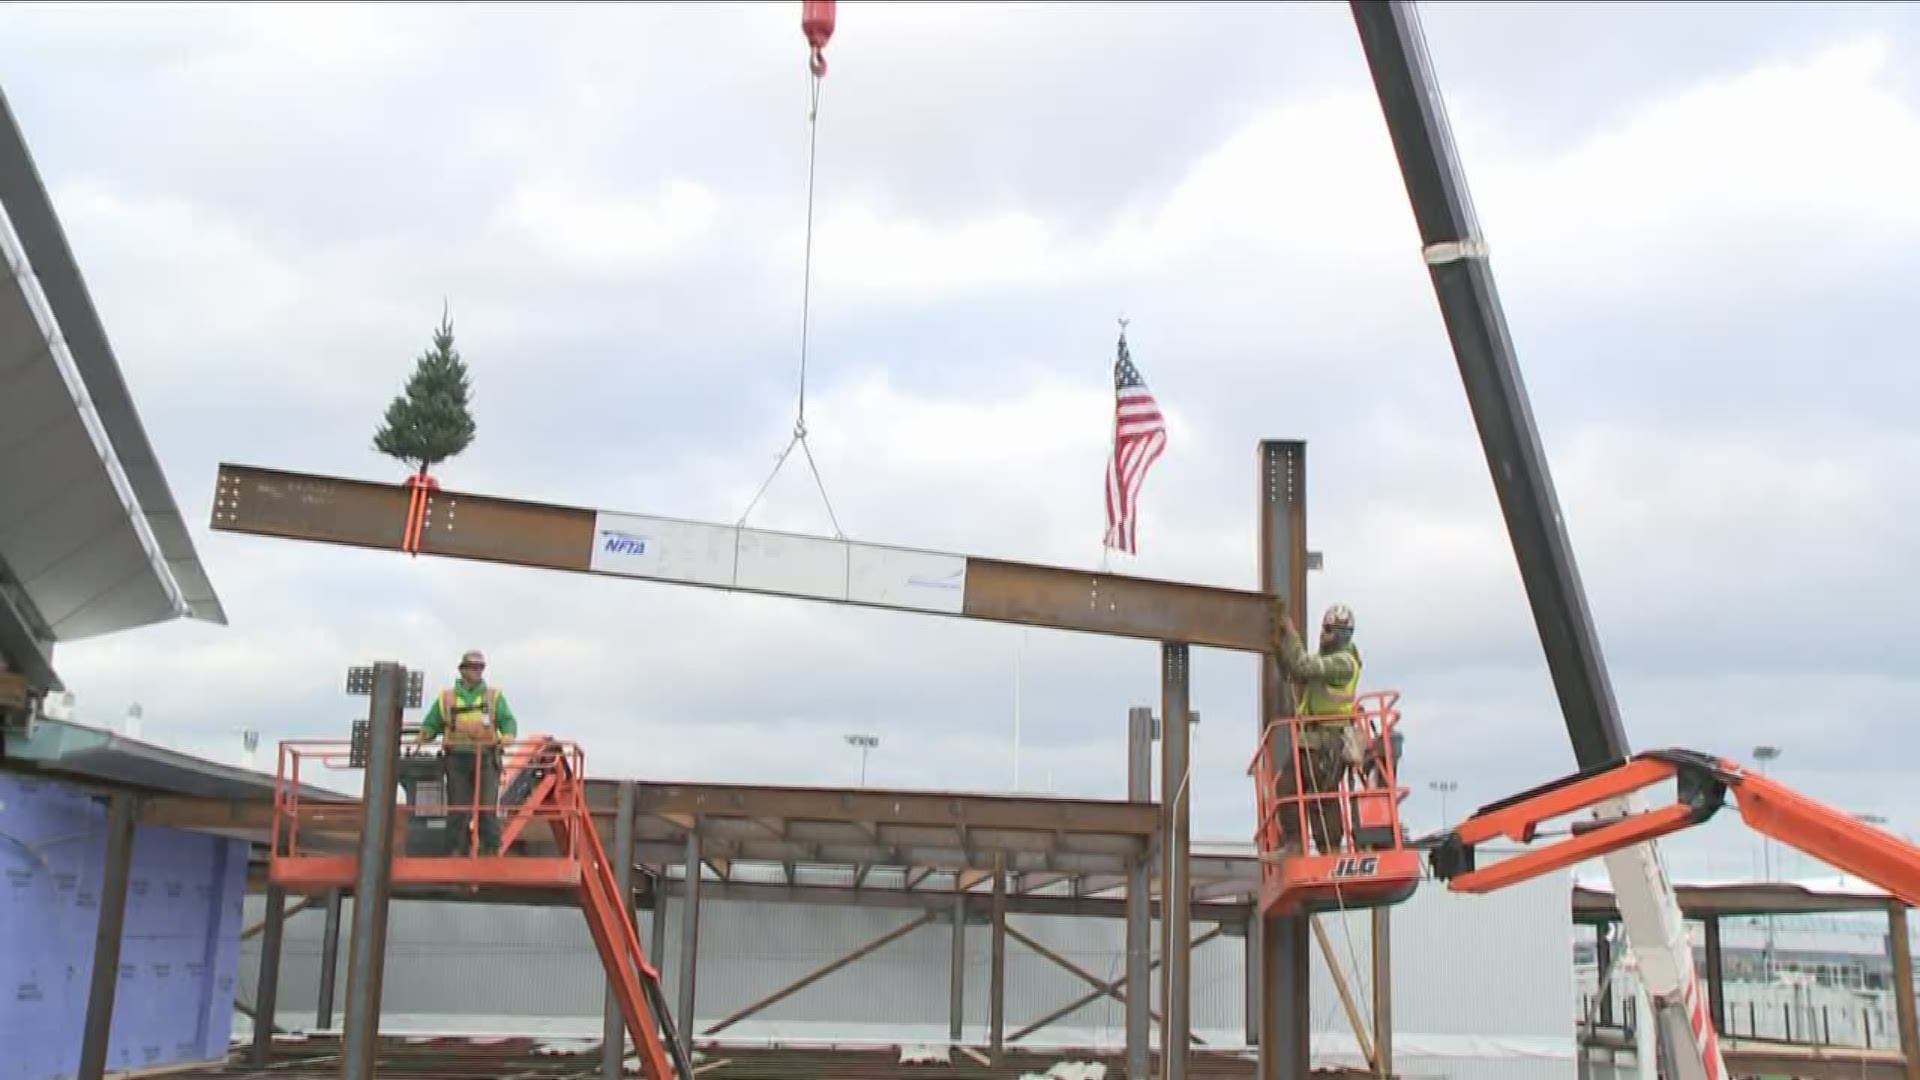 BNIA Host Topping Off Ceremony